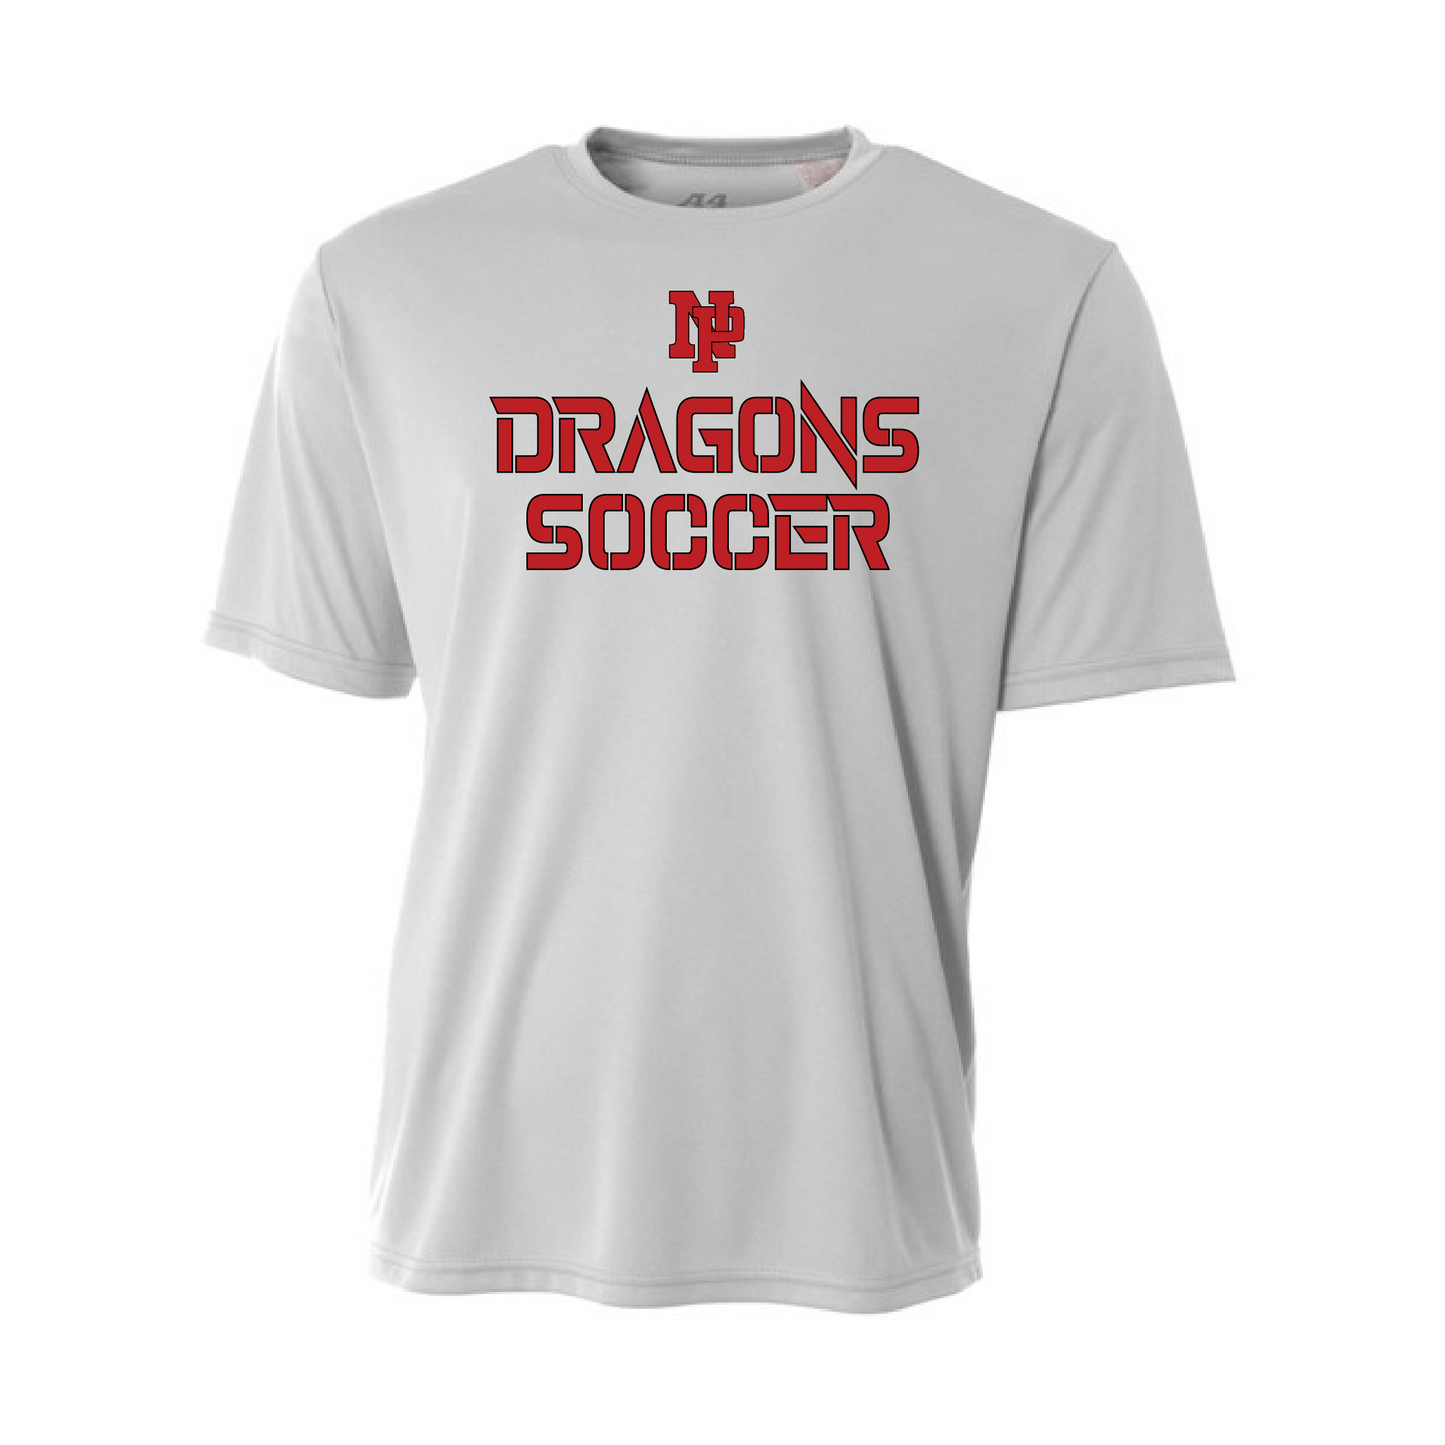 Youth S/S T-Shirt - Dragons Soccer